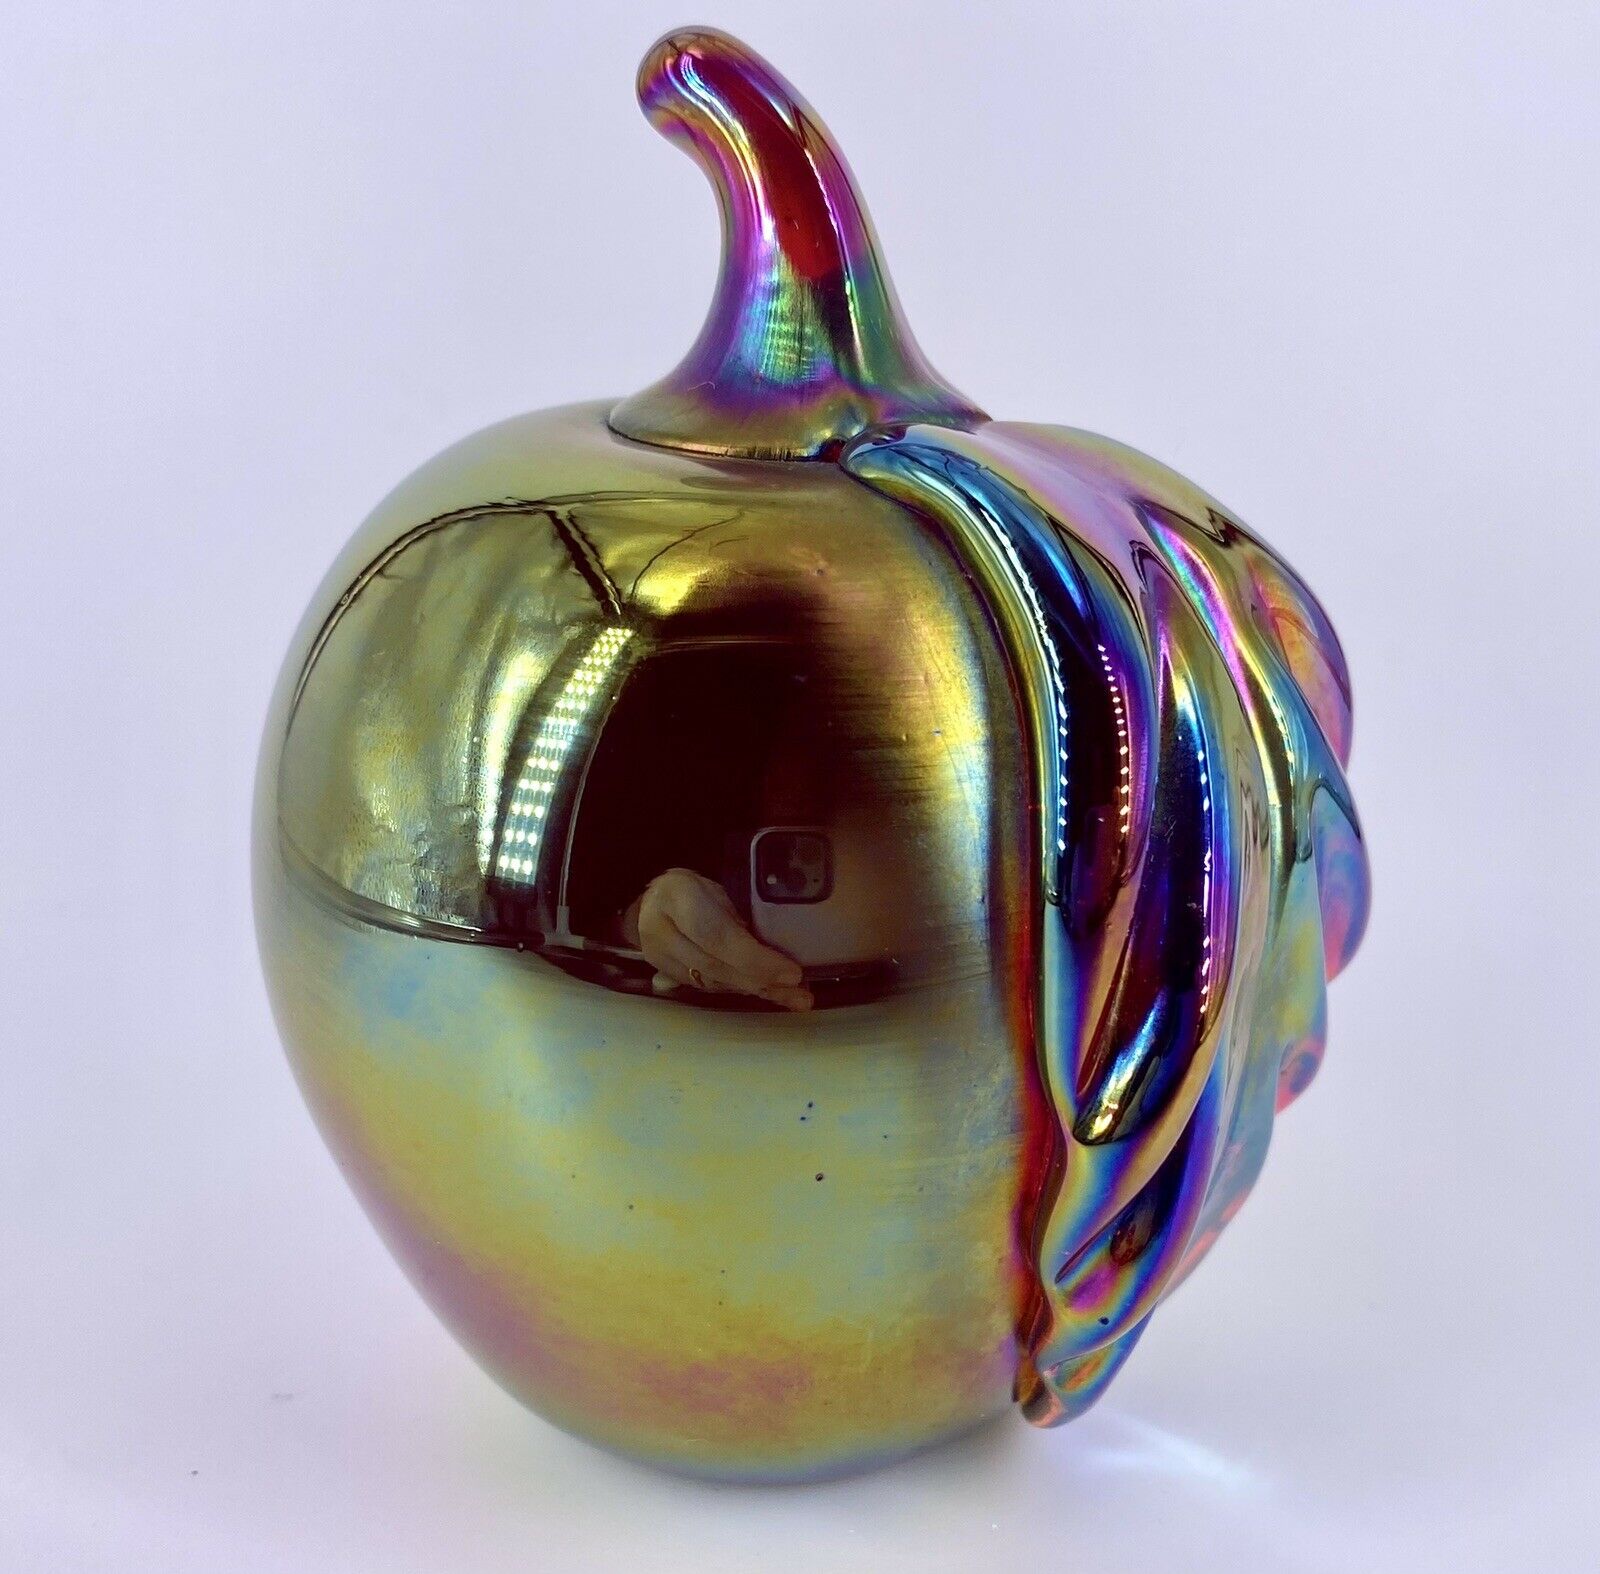 Vintage Gibson Art Glass Apple Paperweight Iridescent Carnival Glass 4" Signed